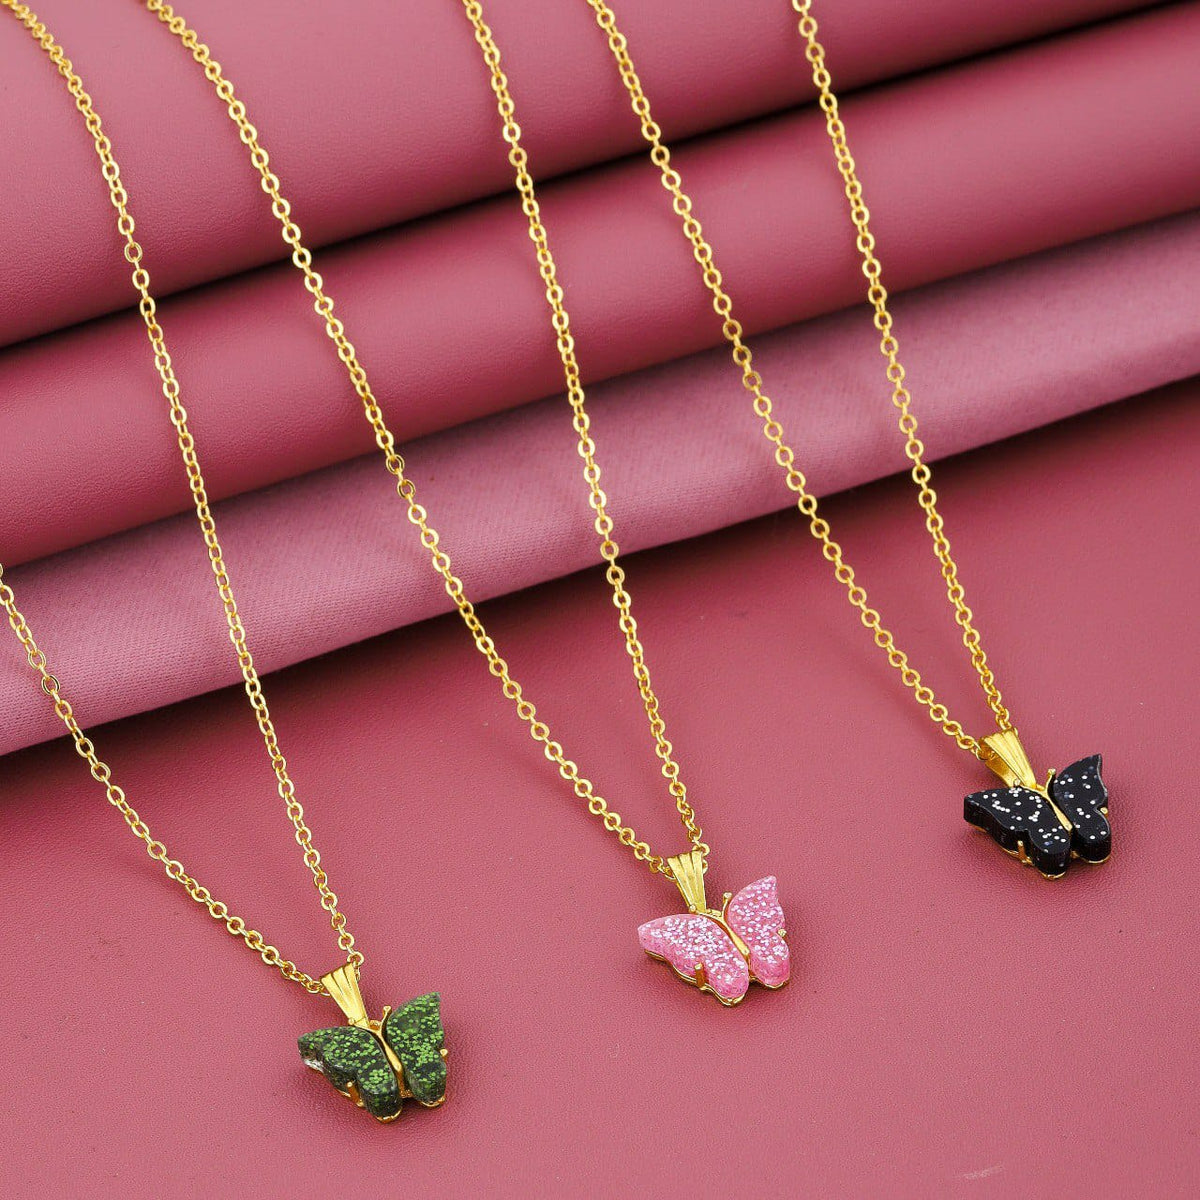 BUTTERFLY CHAIN COMBO FOR HER 3 BUTTERFLY WITH 3 CHAIN